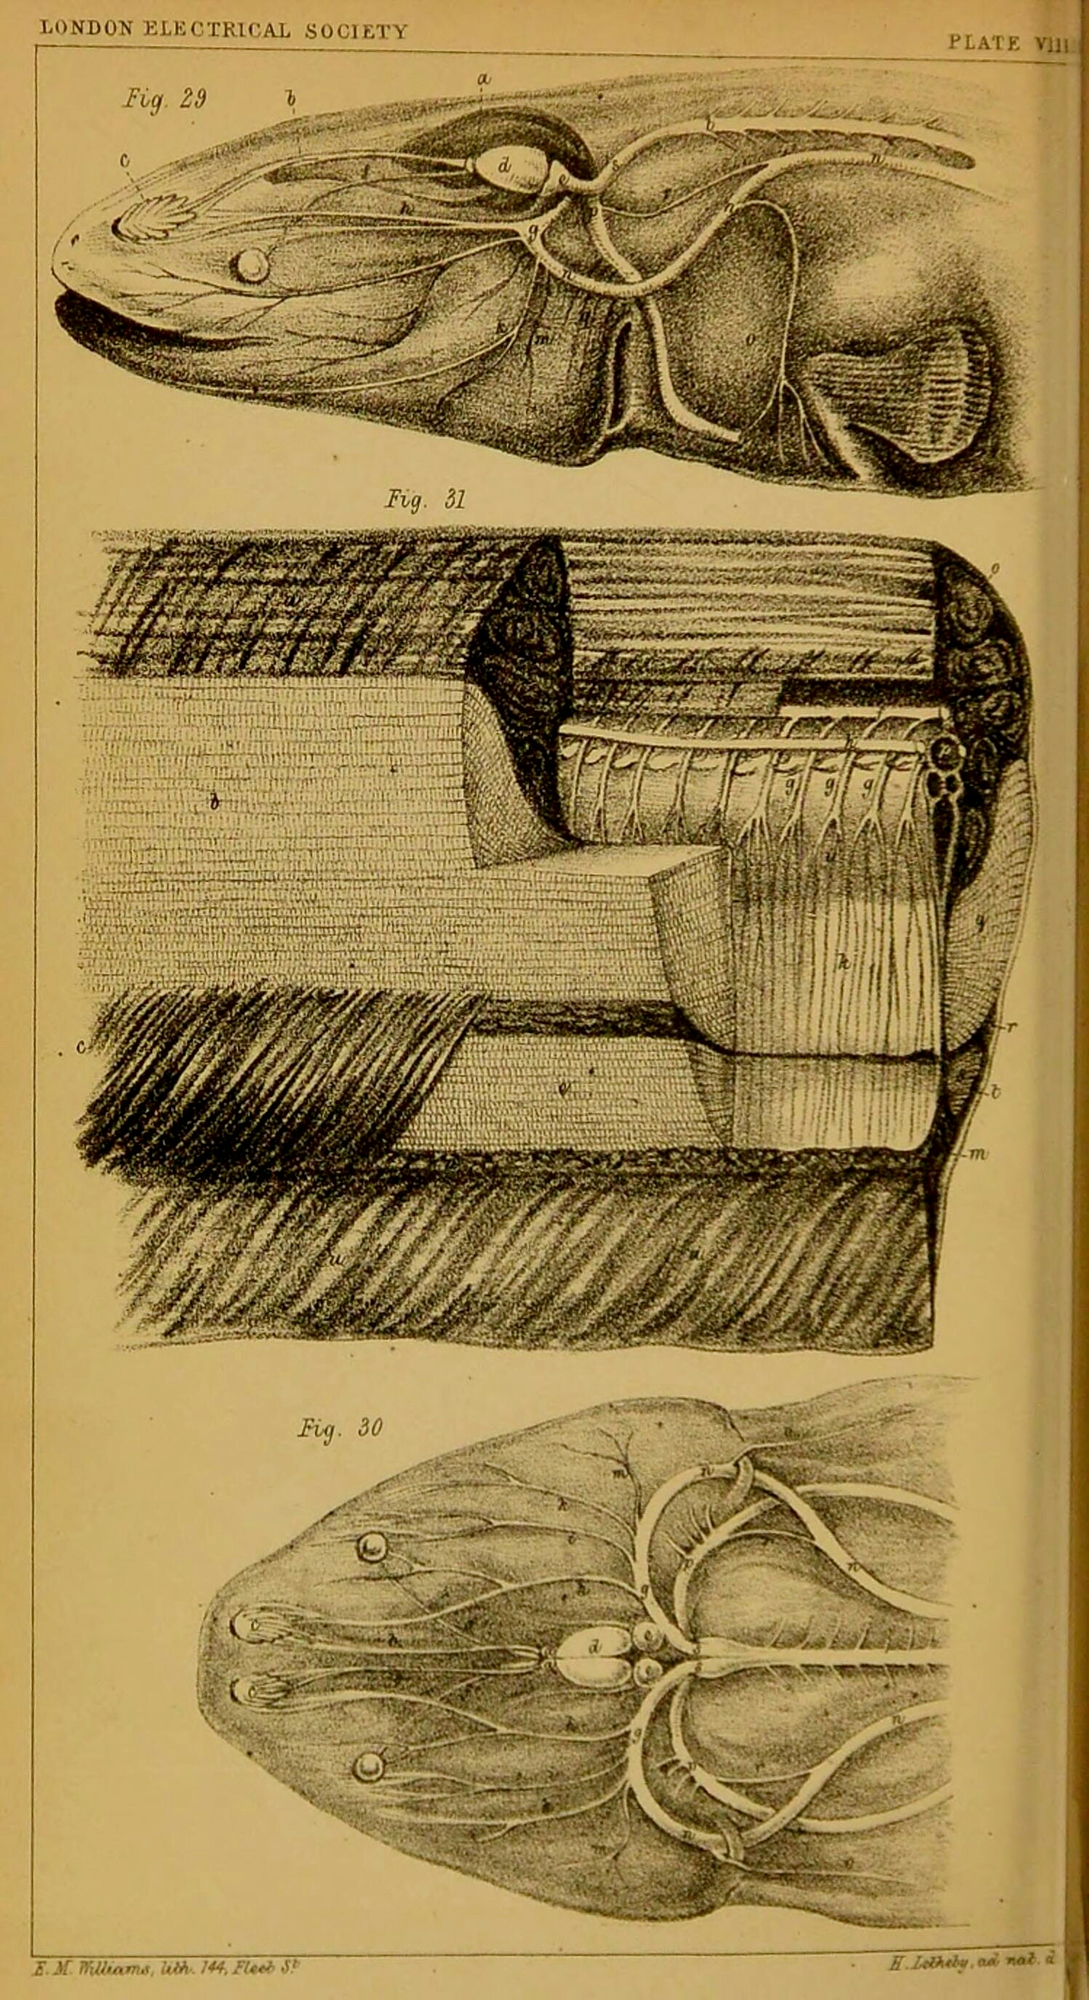 An account of the dissection of a Gymnotus electricus : together with reasons for believing that it derives its electricity from the brain and spinal cord, and that the nervous and electrical forces are identical, by Henry Letheby. A chemist and medical officer of health in London, Henry Letheby was interested in the medical application of electricity.